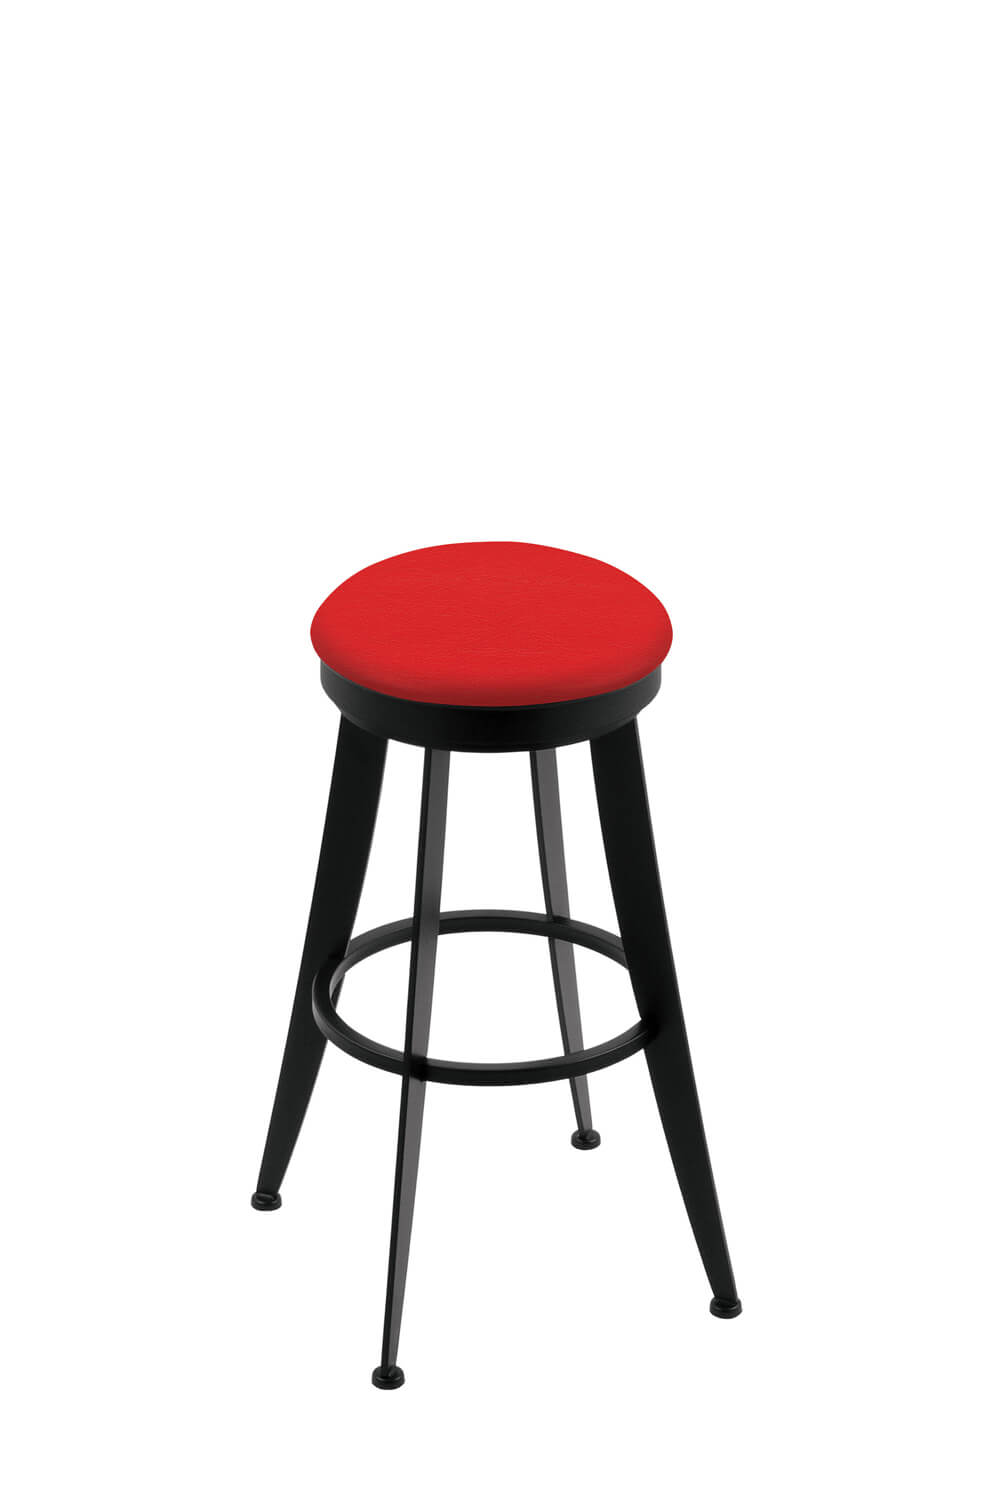 900 Laser Backless Swivel 30 Bar Stool, Red Leather Backless Bar Stools